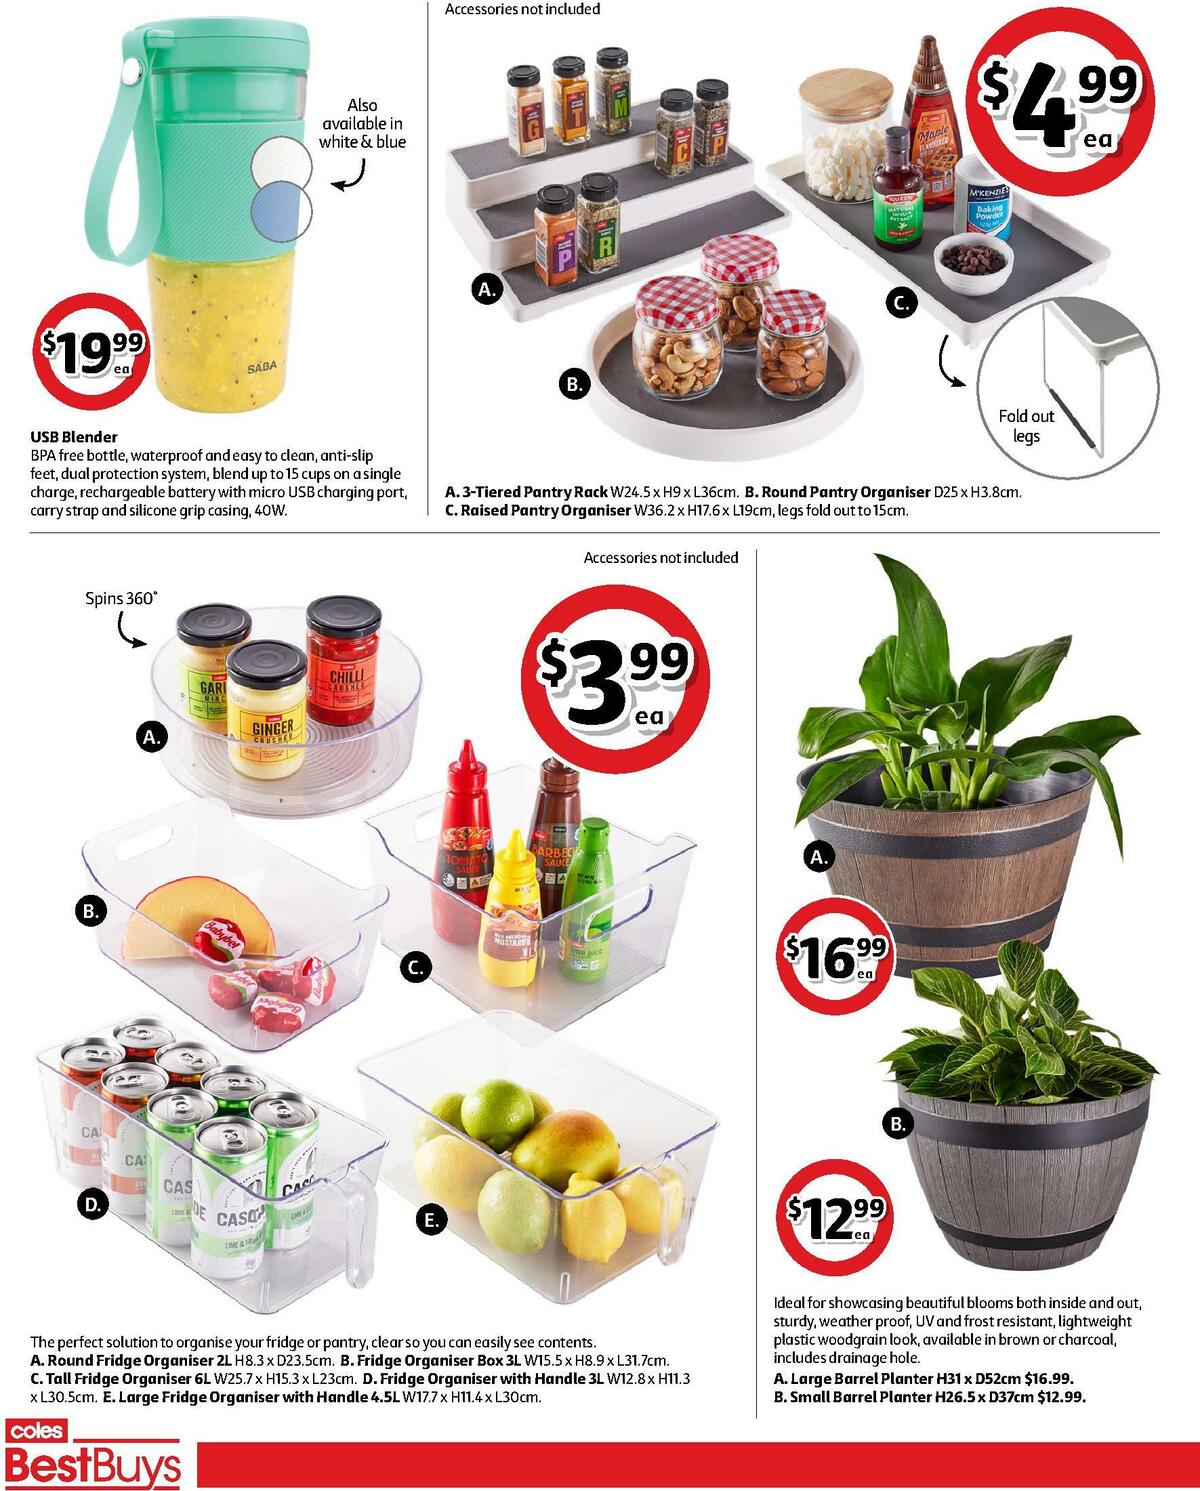 Coles Best Buys - Tidy Kitchen Catalogues from 18 February